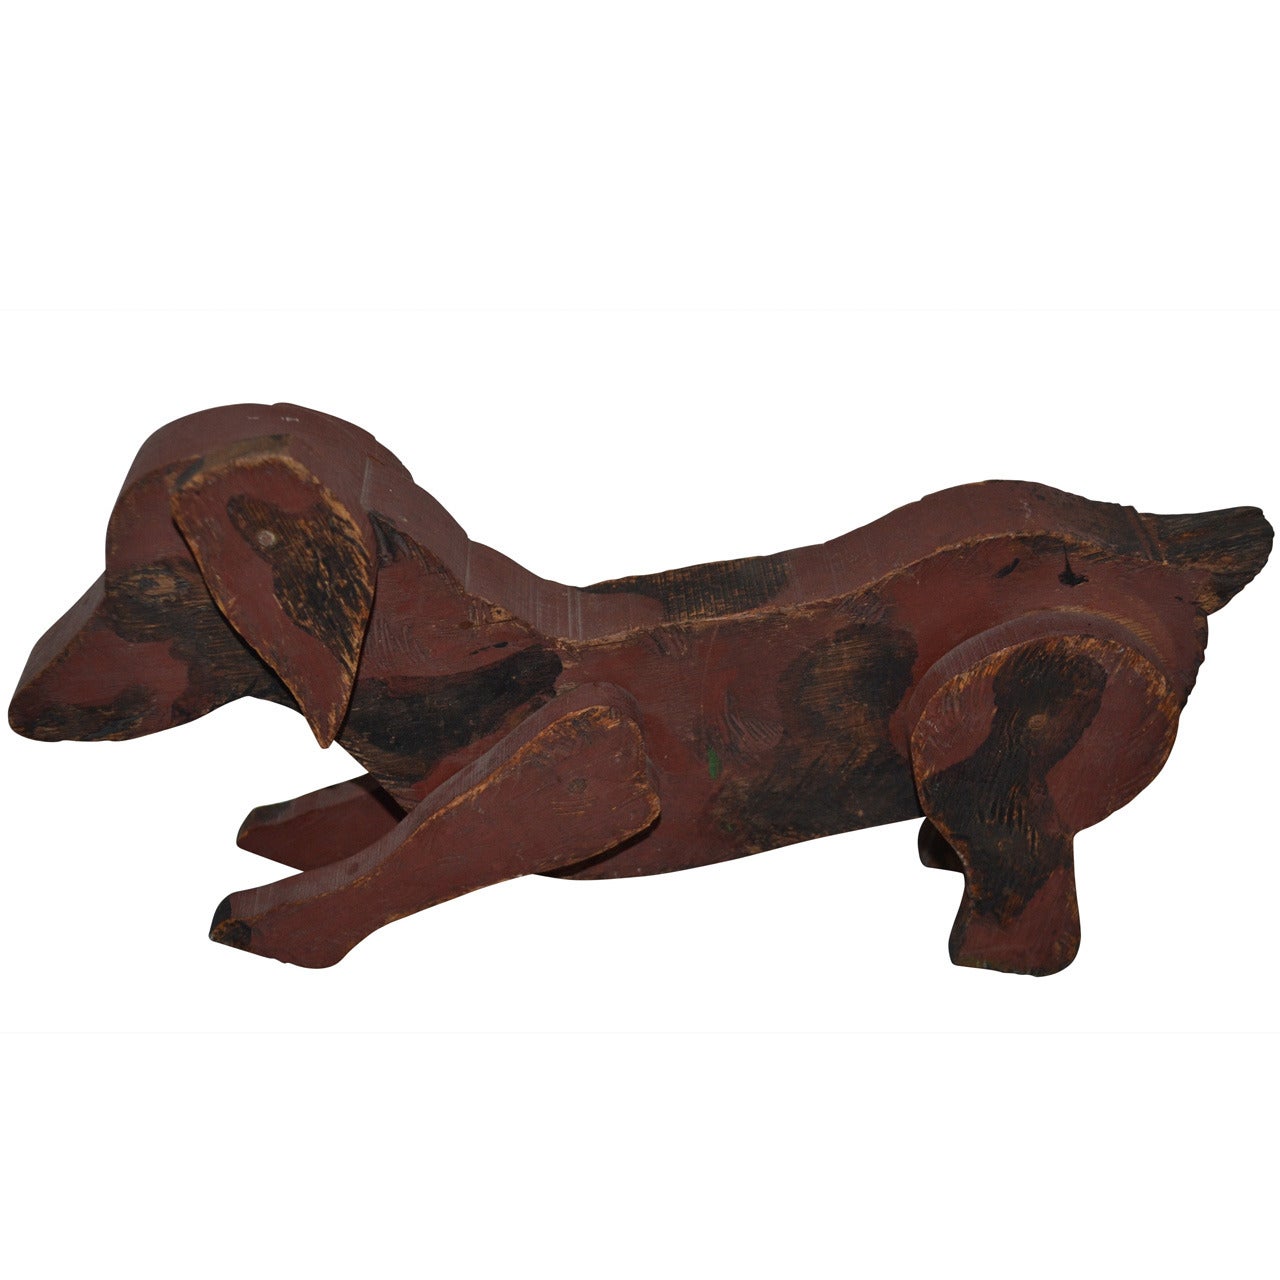 Small 19th Century Wooden Toy Dog